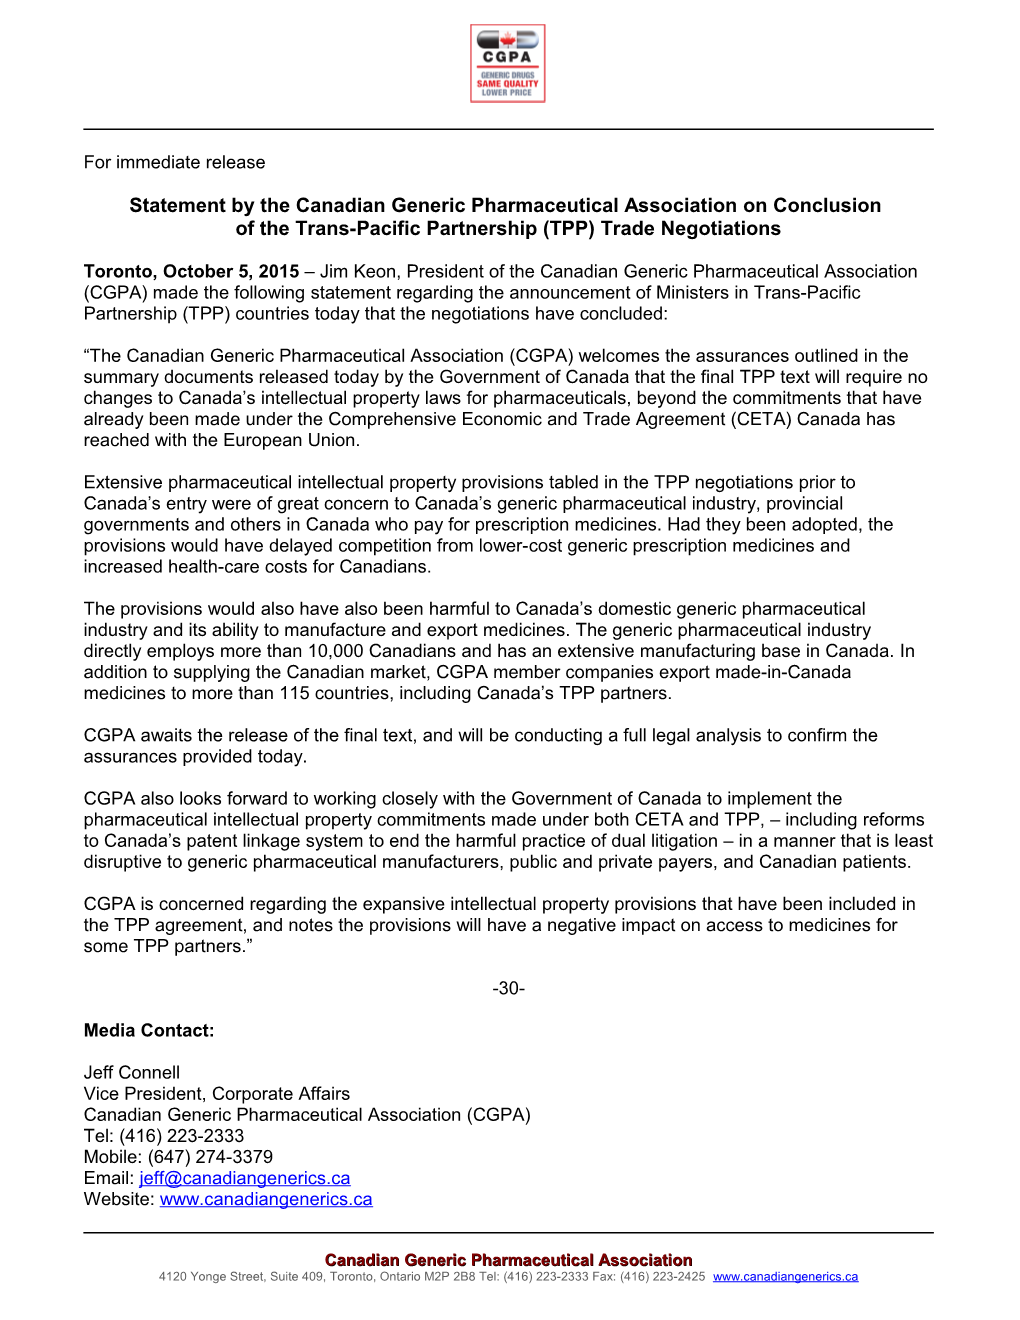 Statement by the Canadian Generic Pharmaceutical Association on Conclusion